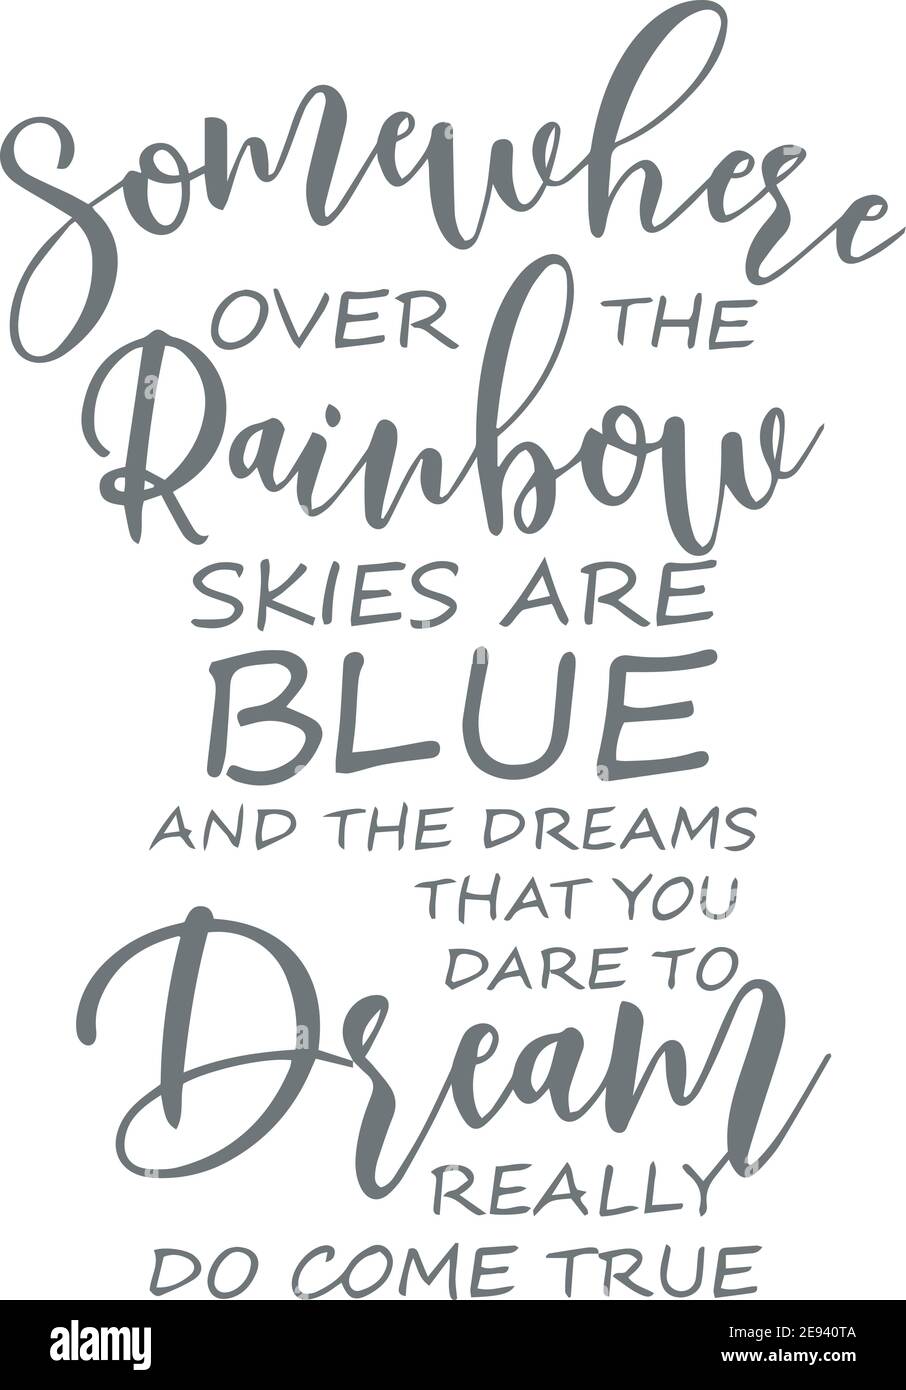 Download Somewhere Over The Rainbow Skies Are Blue And The Dreams That You Dare To Dream Really Logo Sign Inspirational Quotes And Motivational Typography Stock Vector Image Art Alamy